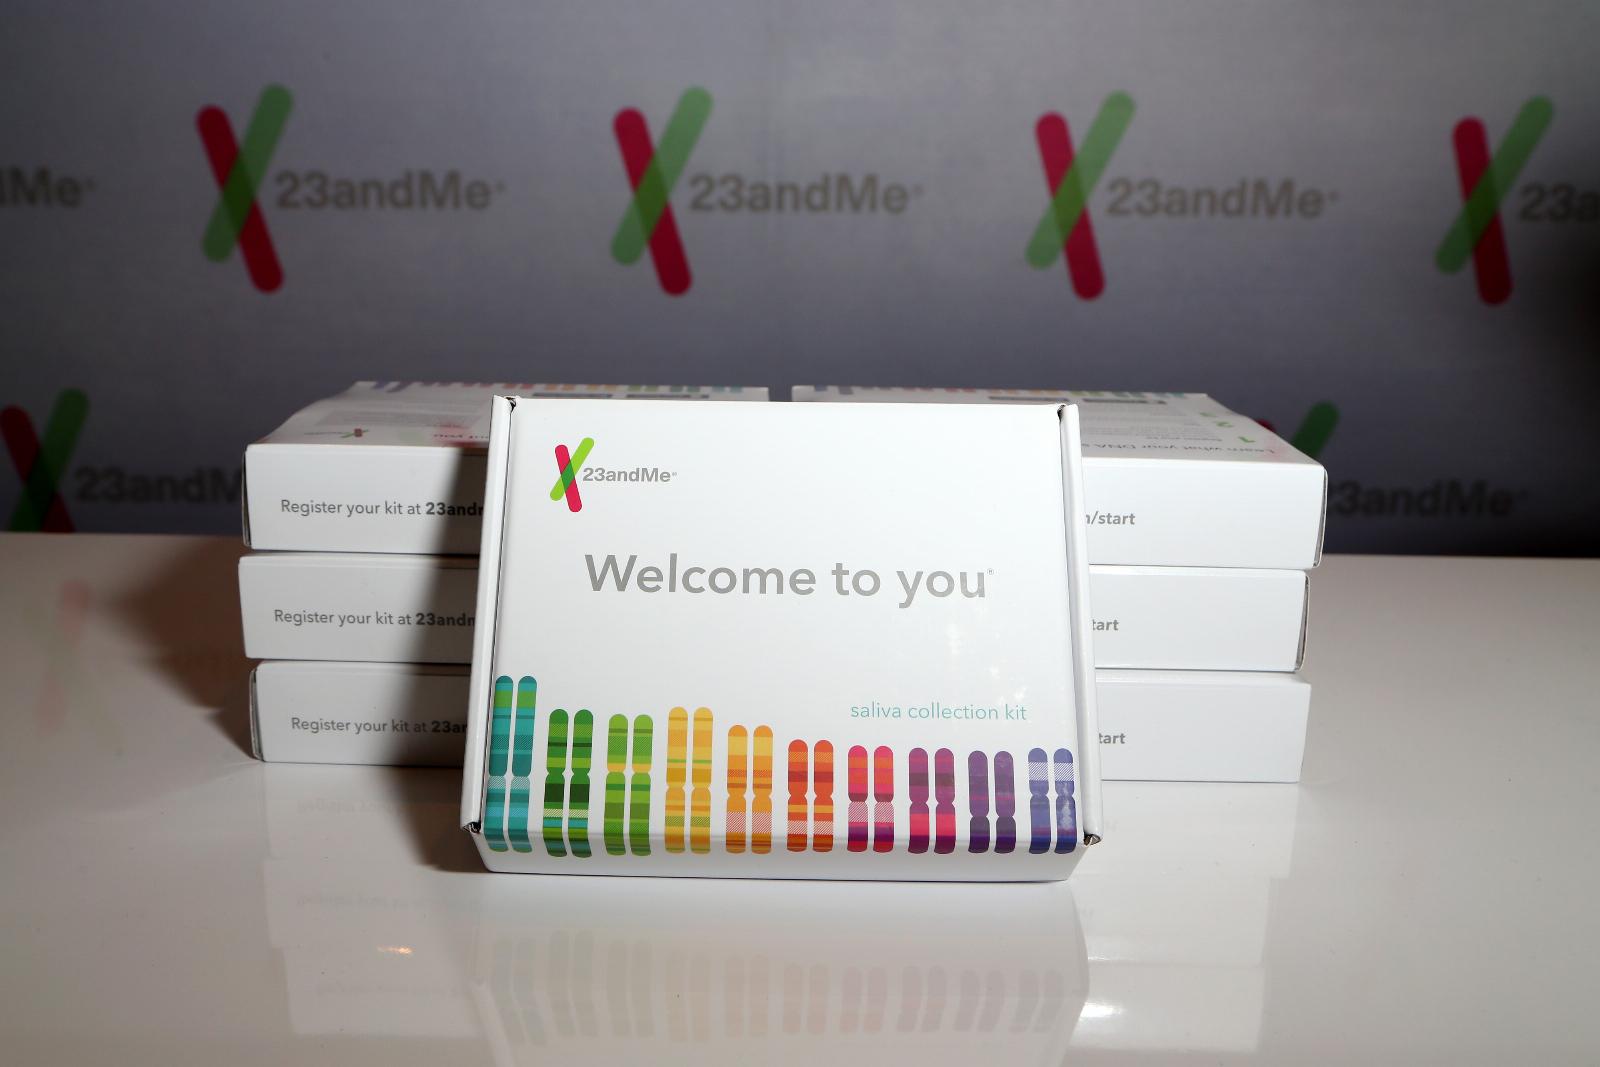 23andMe tells victims it’s their fault that their data was breached